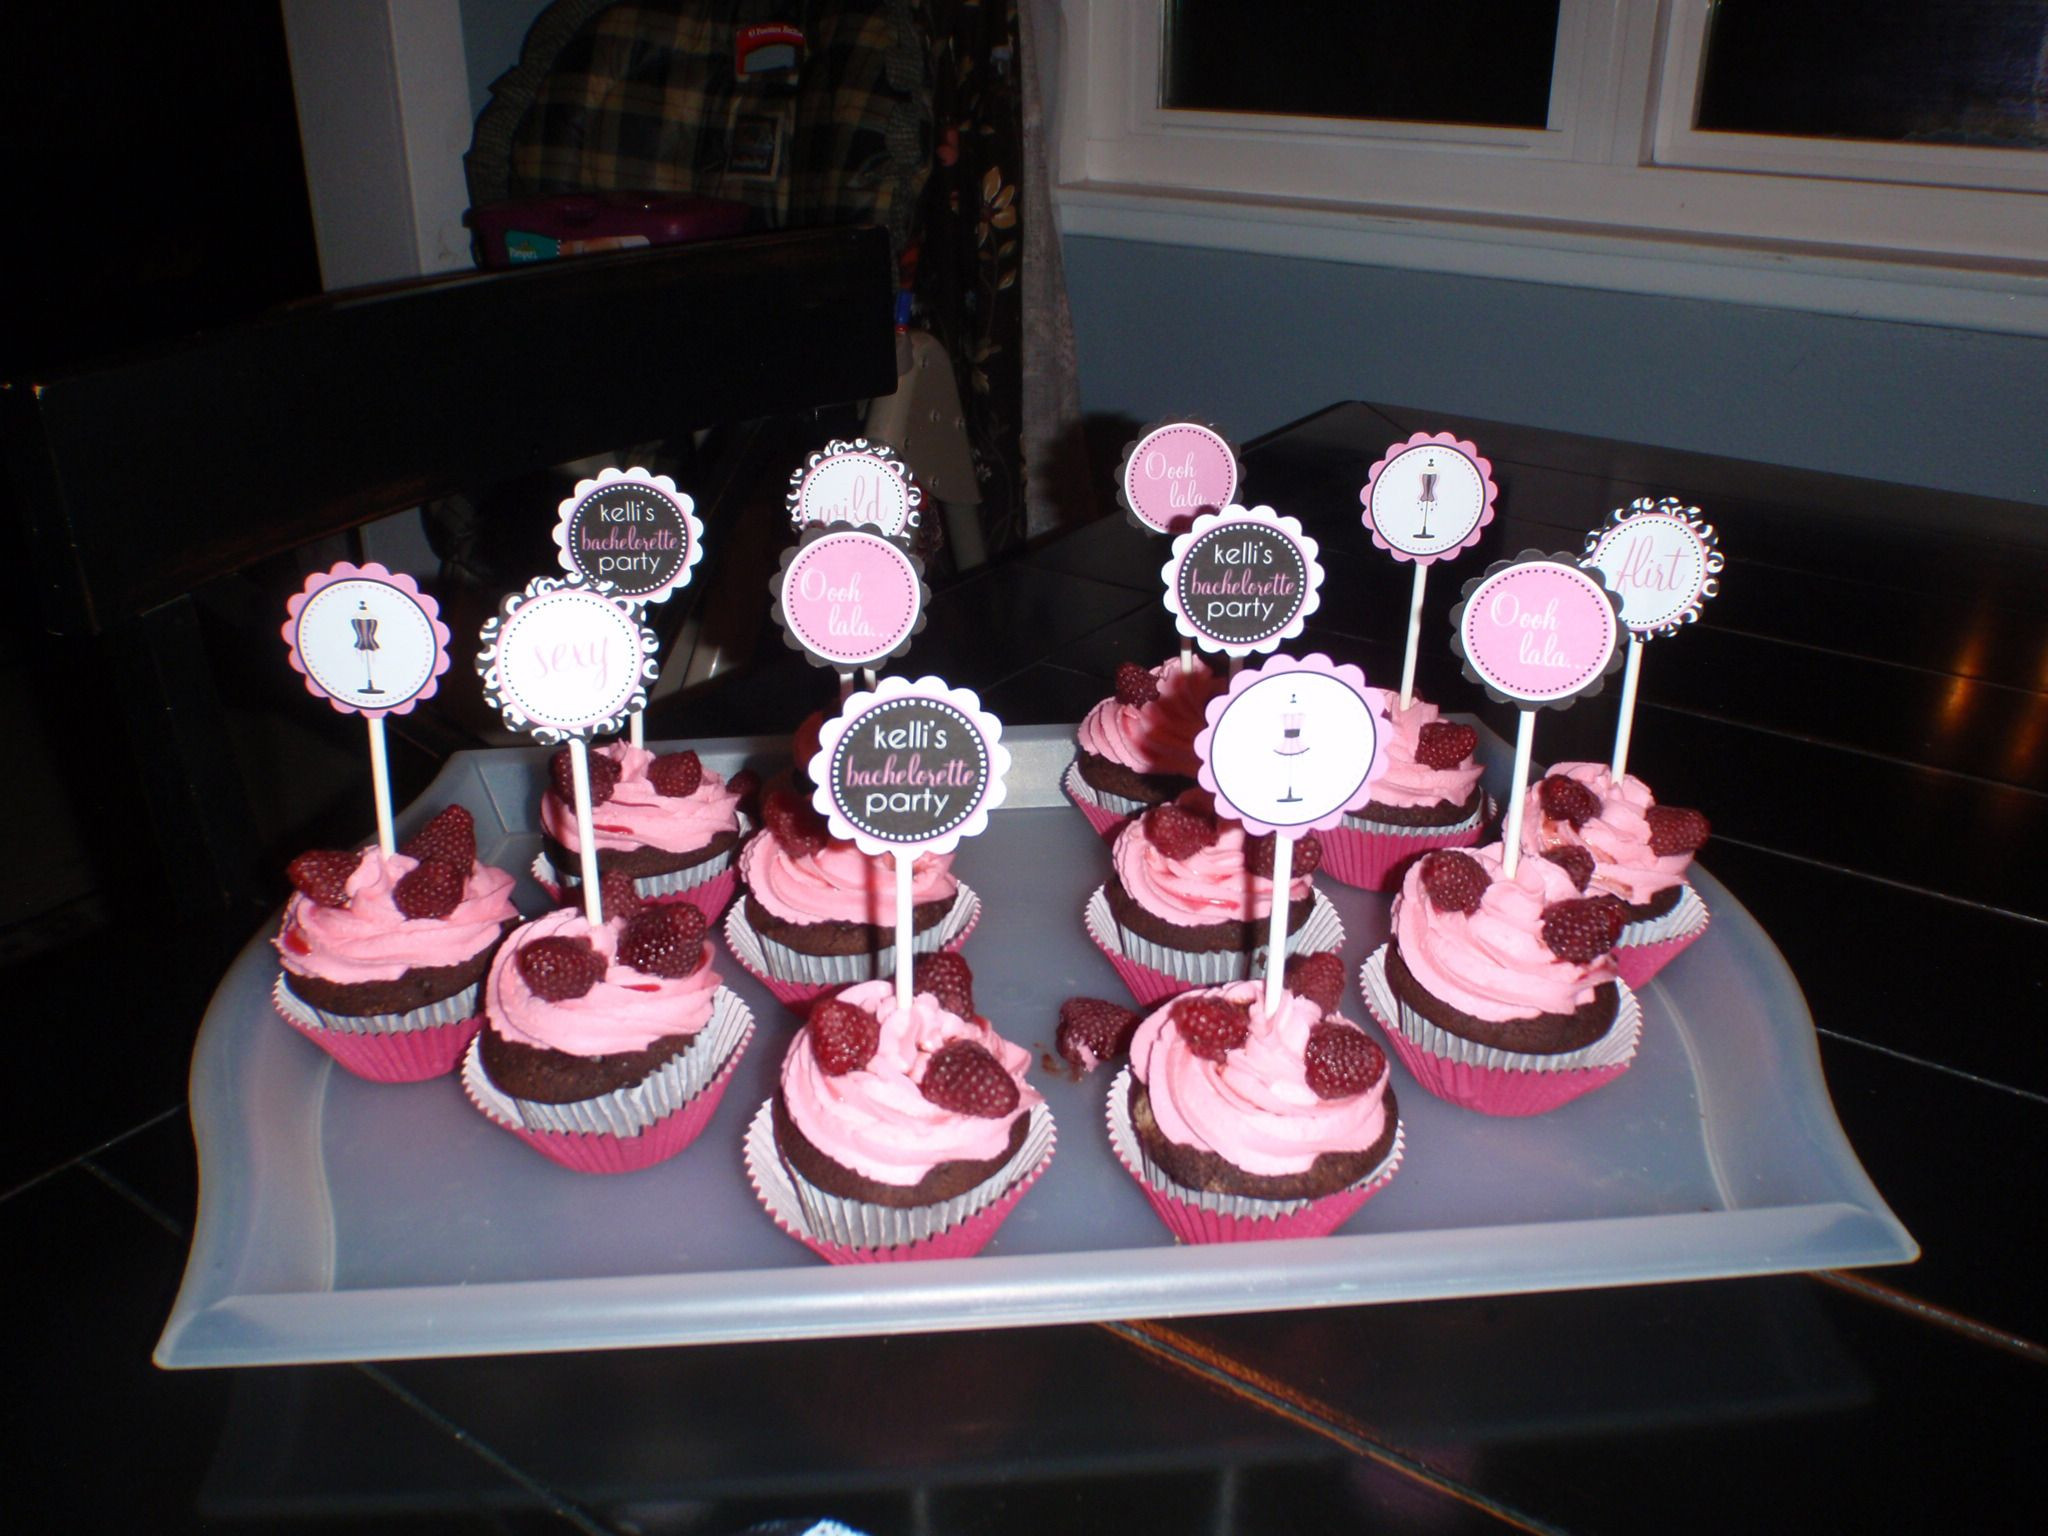 Bachelorette Party Cupcake Ideas
 I love the personalized cupcake toppers Perfect cupcakes